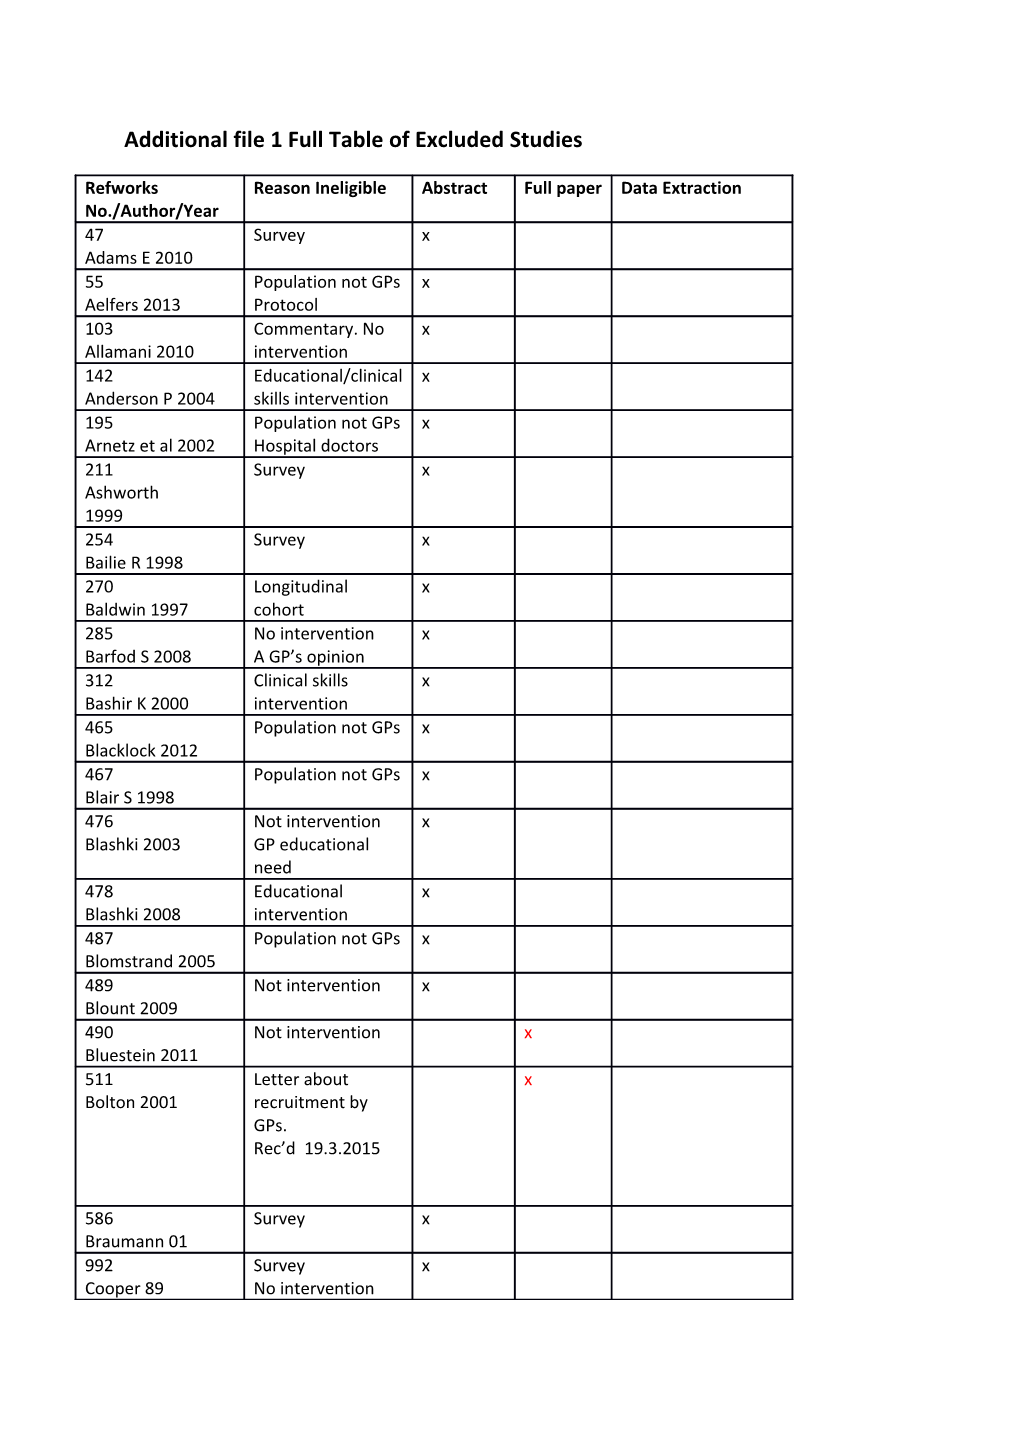 Additional File 1 Full Table of Excluded Studies